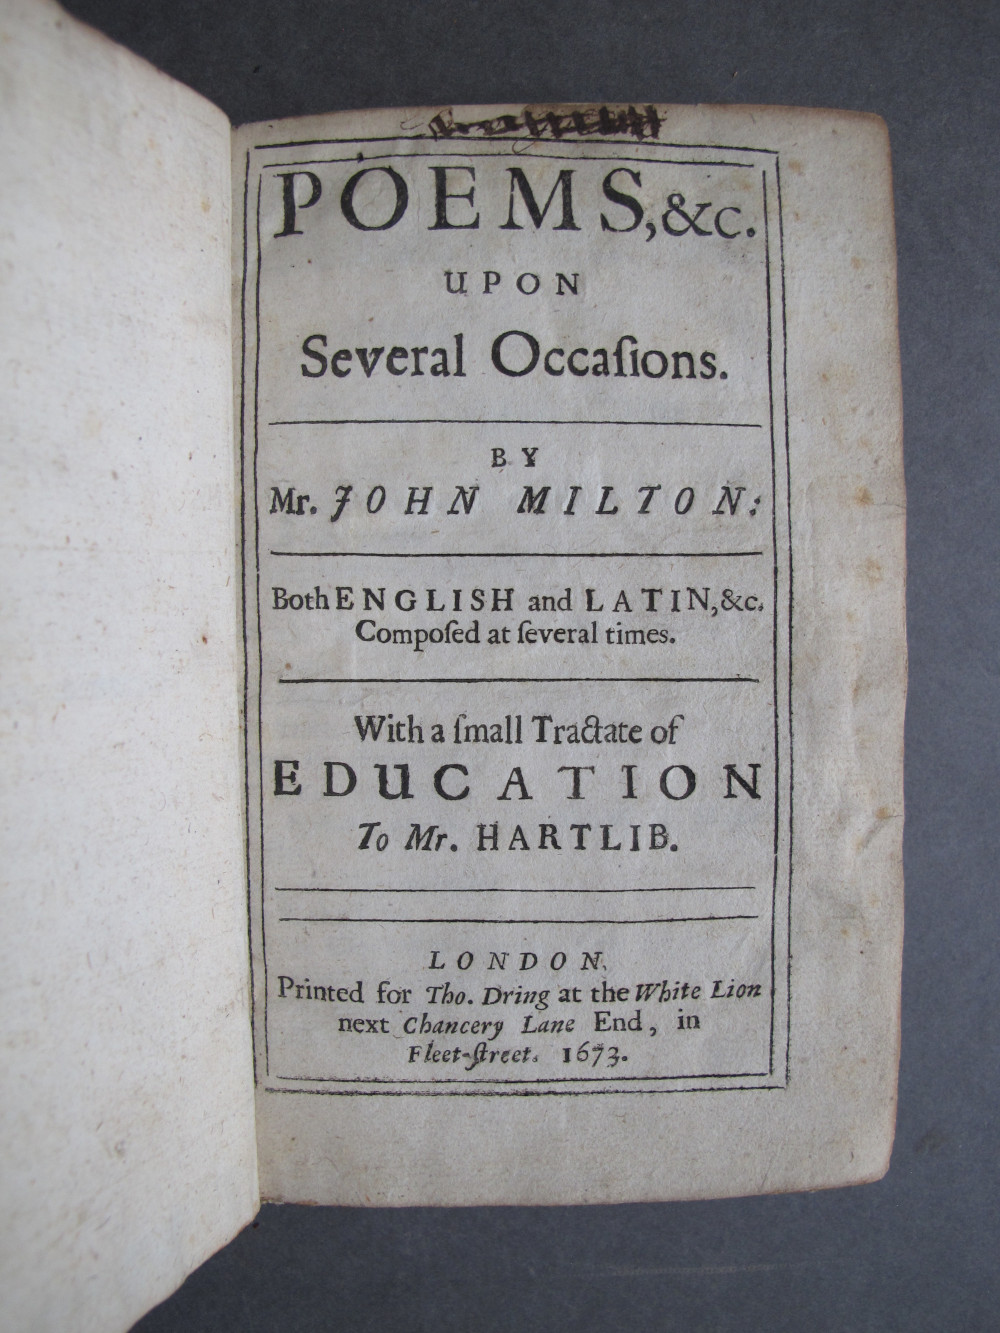 Title Page, text: 
POEMS, &c.
UPON
Several Occasions.

BY
Mr. JOHN MILTON:

Both ENGLISH and LATIN, &c.
Composed at several times.

With a small Tractate of
EDUCATION
To Mr. HARTLIB.

LONDON
Printed for Tho. Dring at the White Lion
next Chancery Lane End, in
Fleet-street. 1673.

